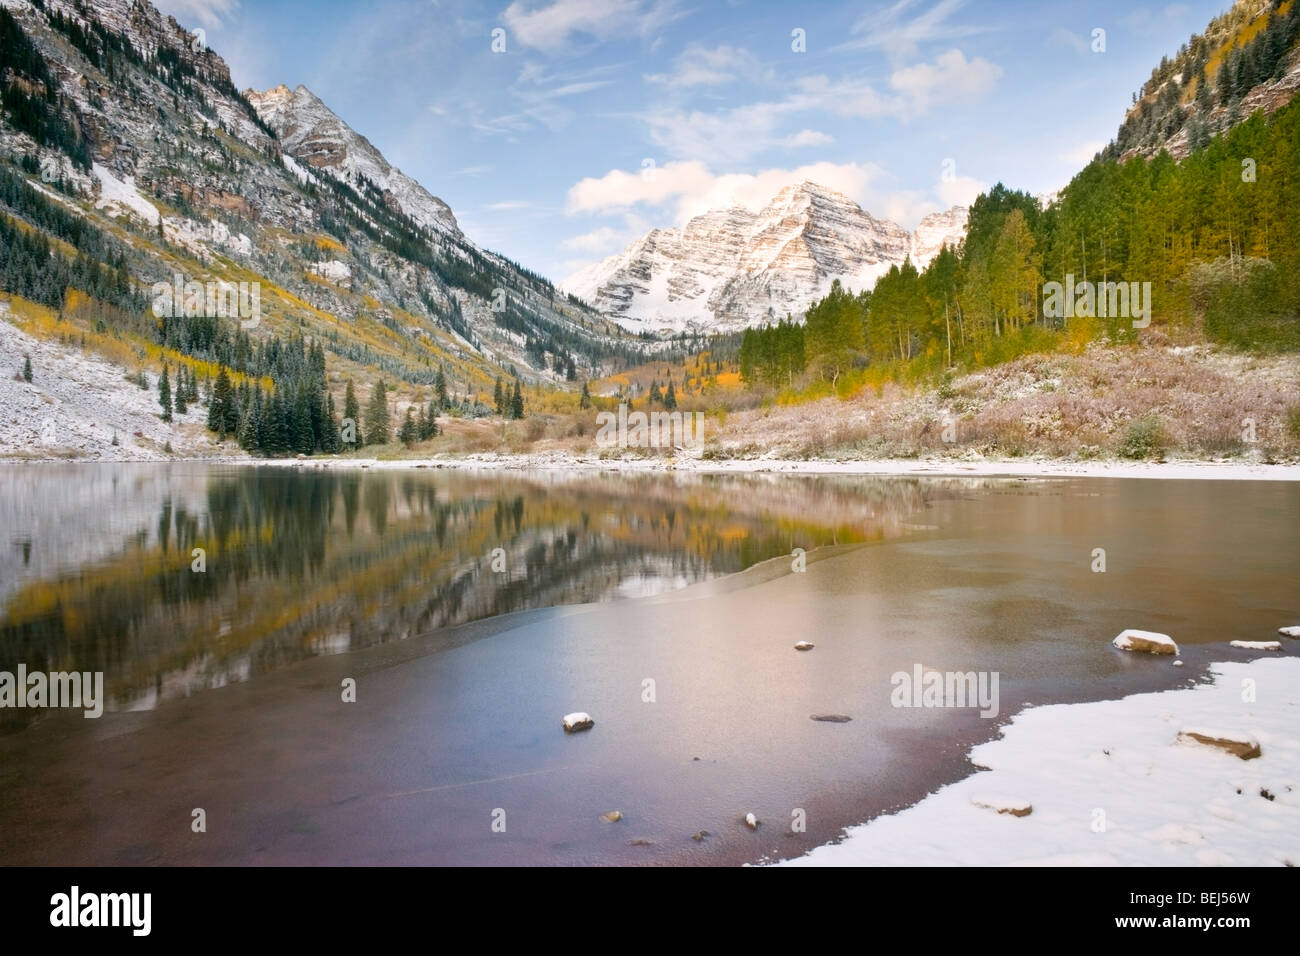 Maroon Bells during the fall season or winter season with frozen lake, ice and snow Stock Photo